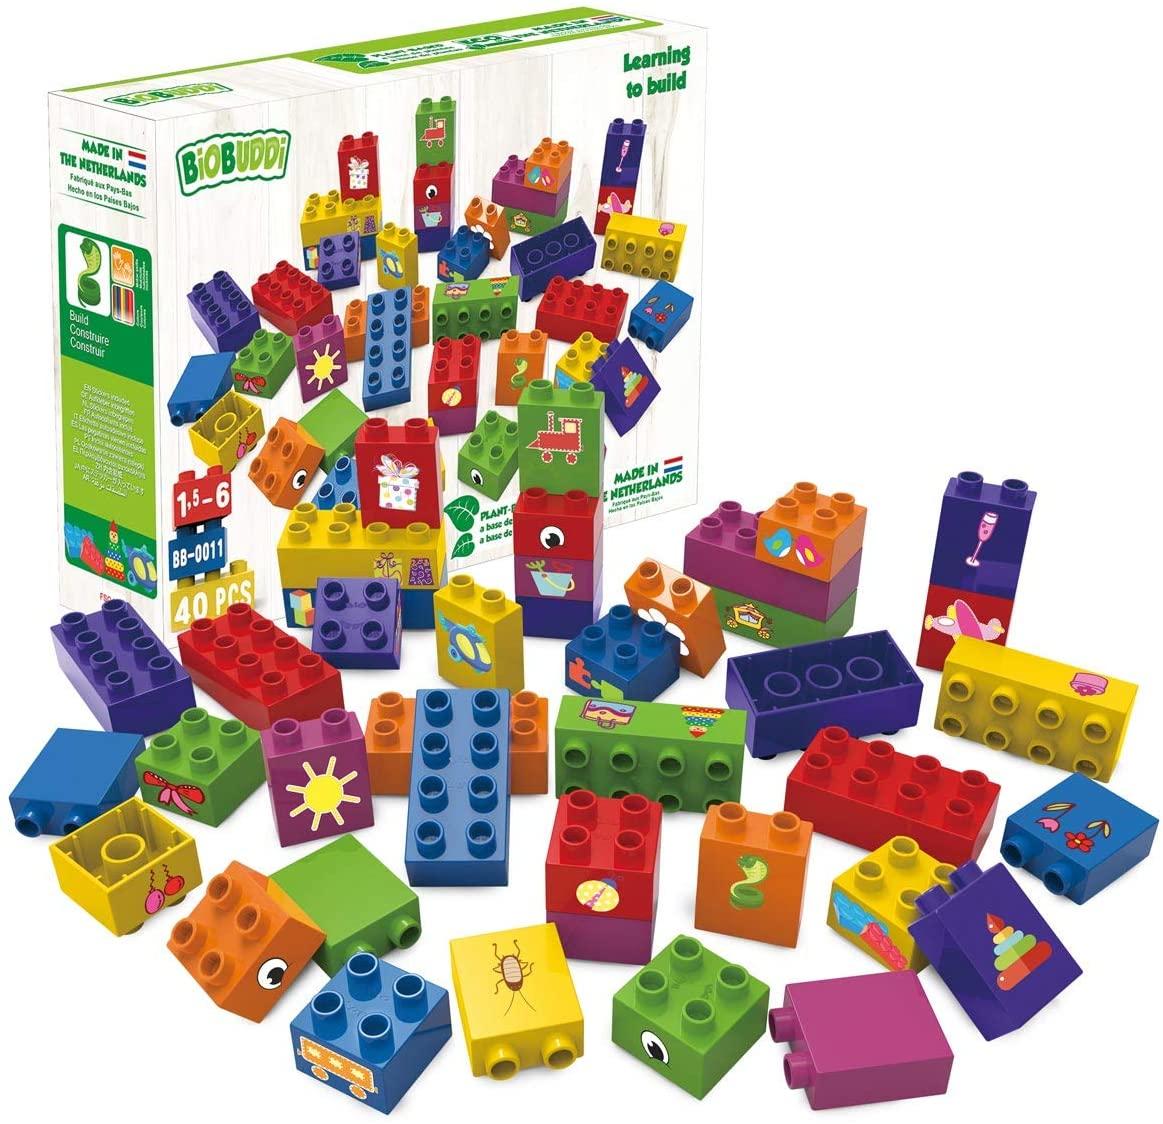 40 Eco-friendly, colourful educational building blocks for young children.